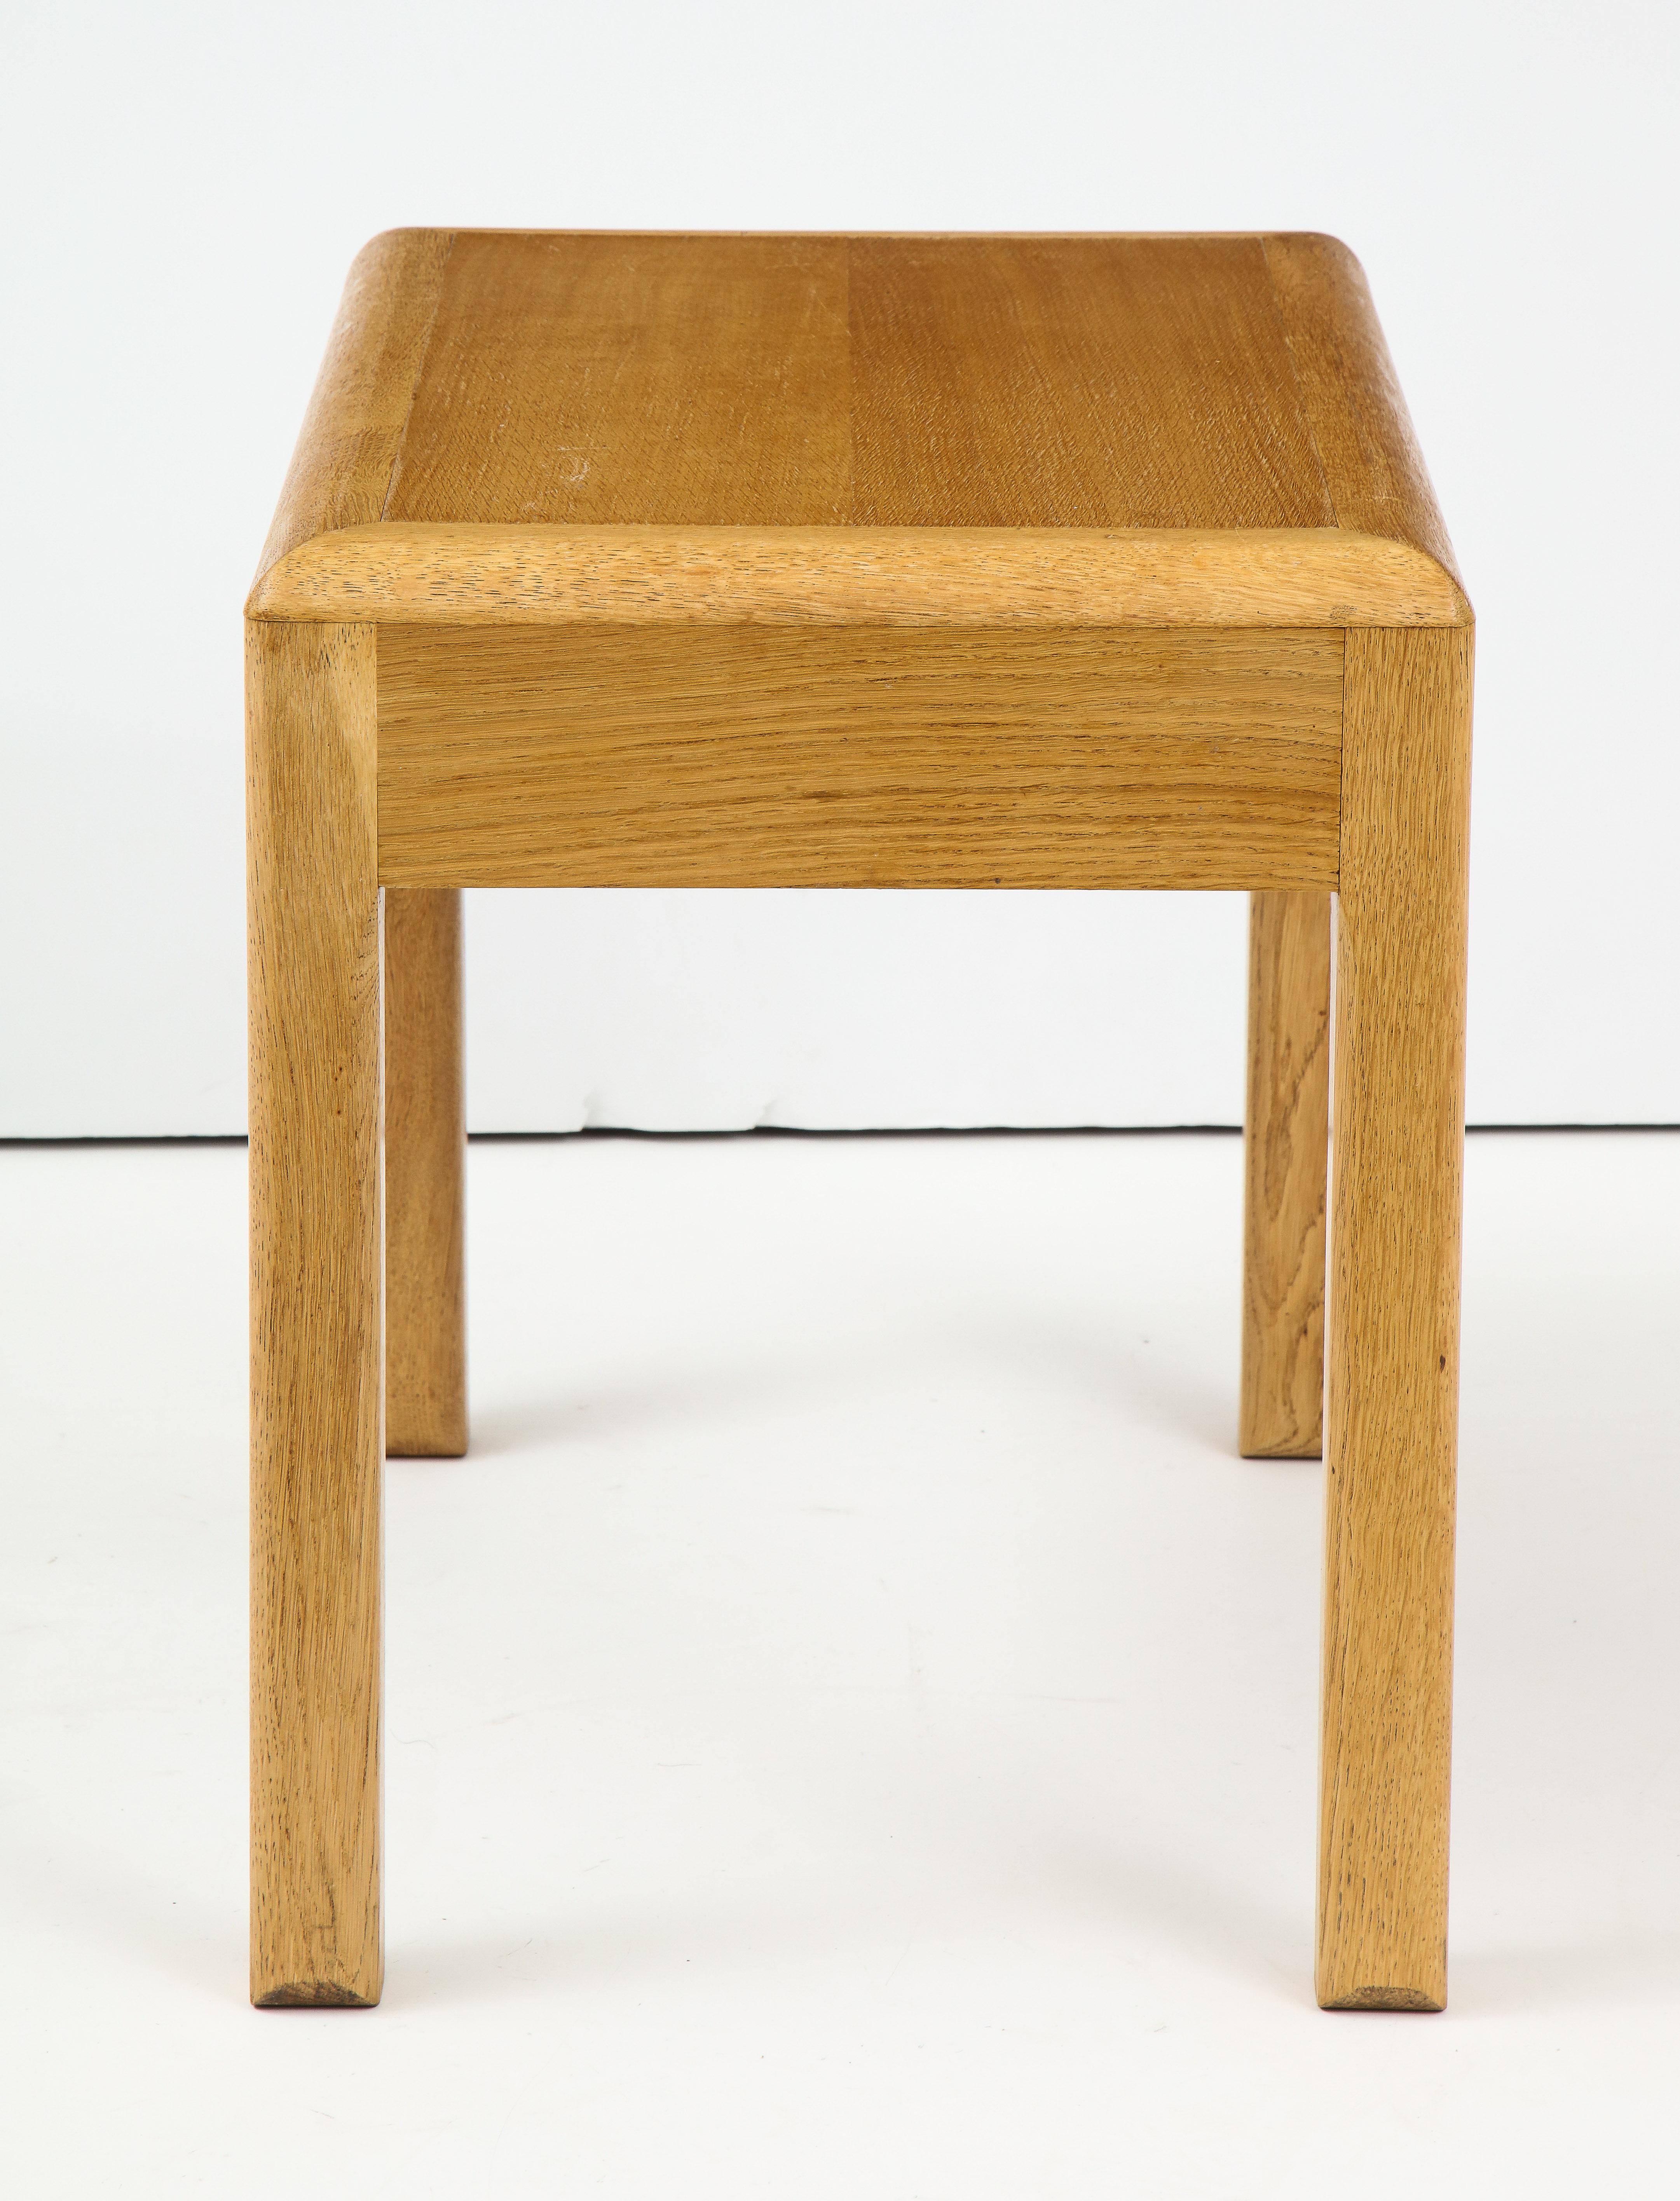 Rare French waxed oak occasional table with a rectangular top by Adolphe Chanaux, circa 1930.